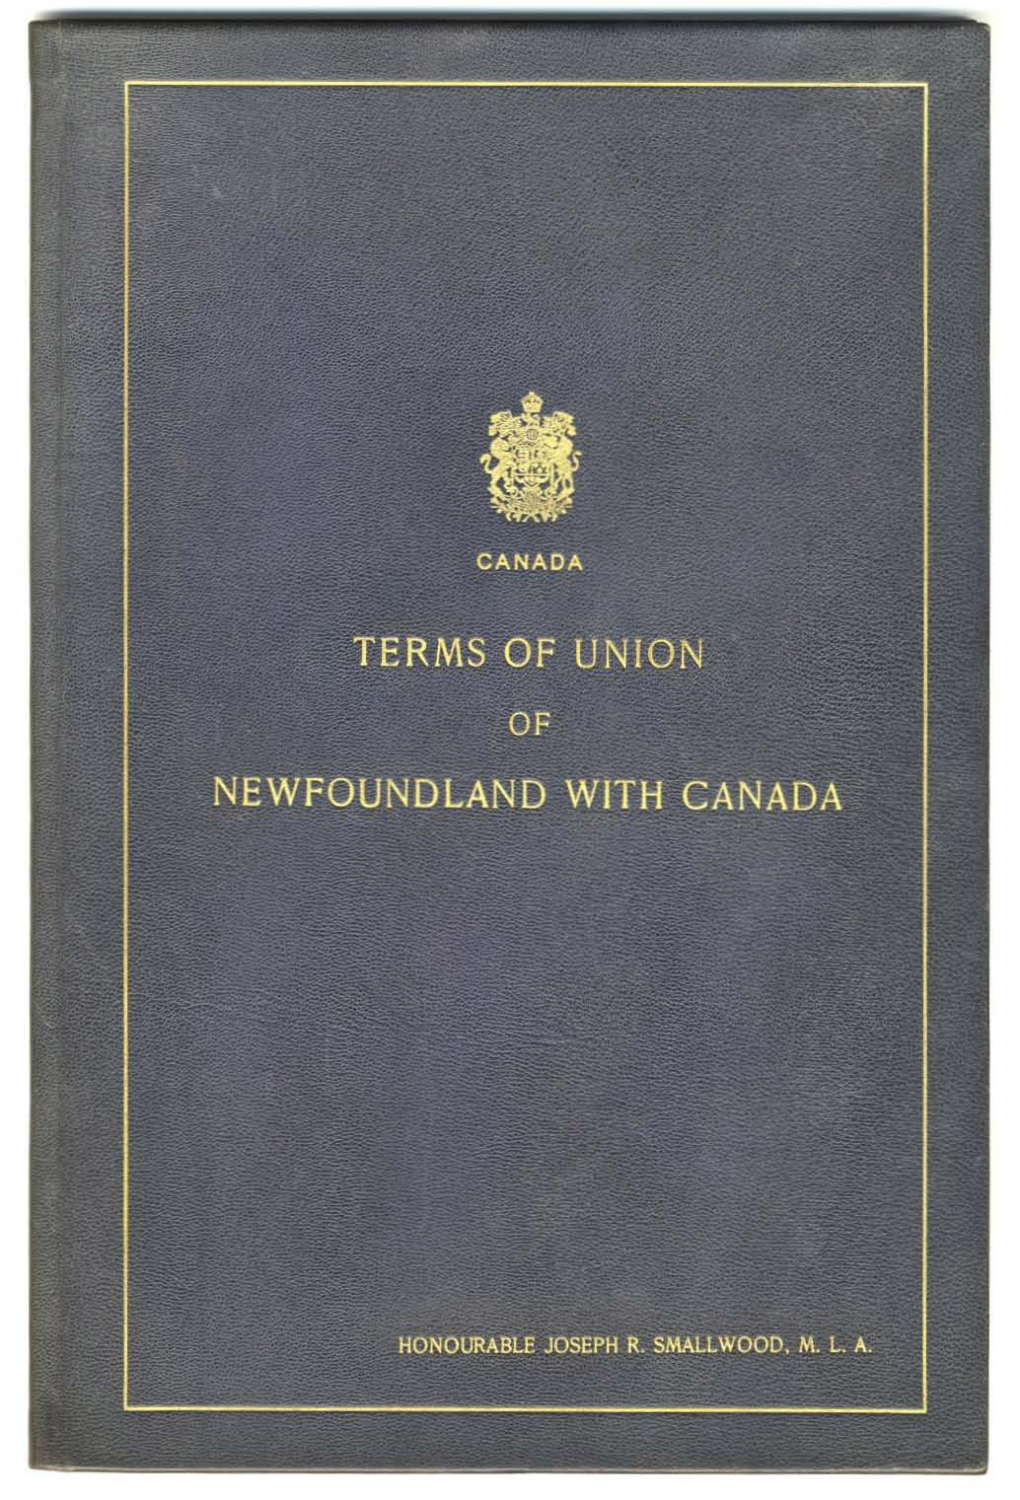 Terms of Union Text